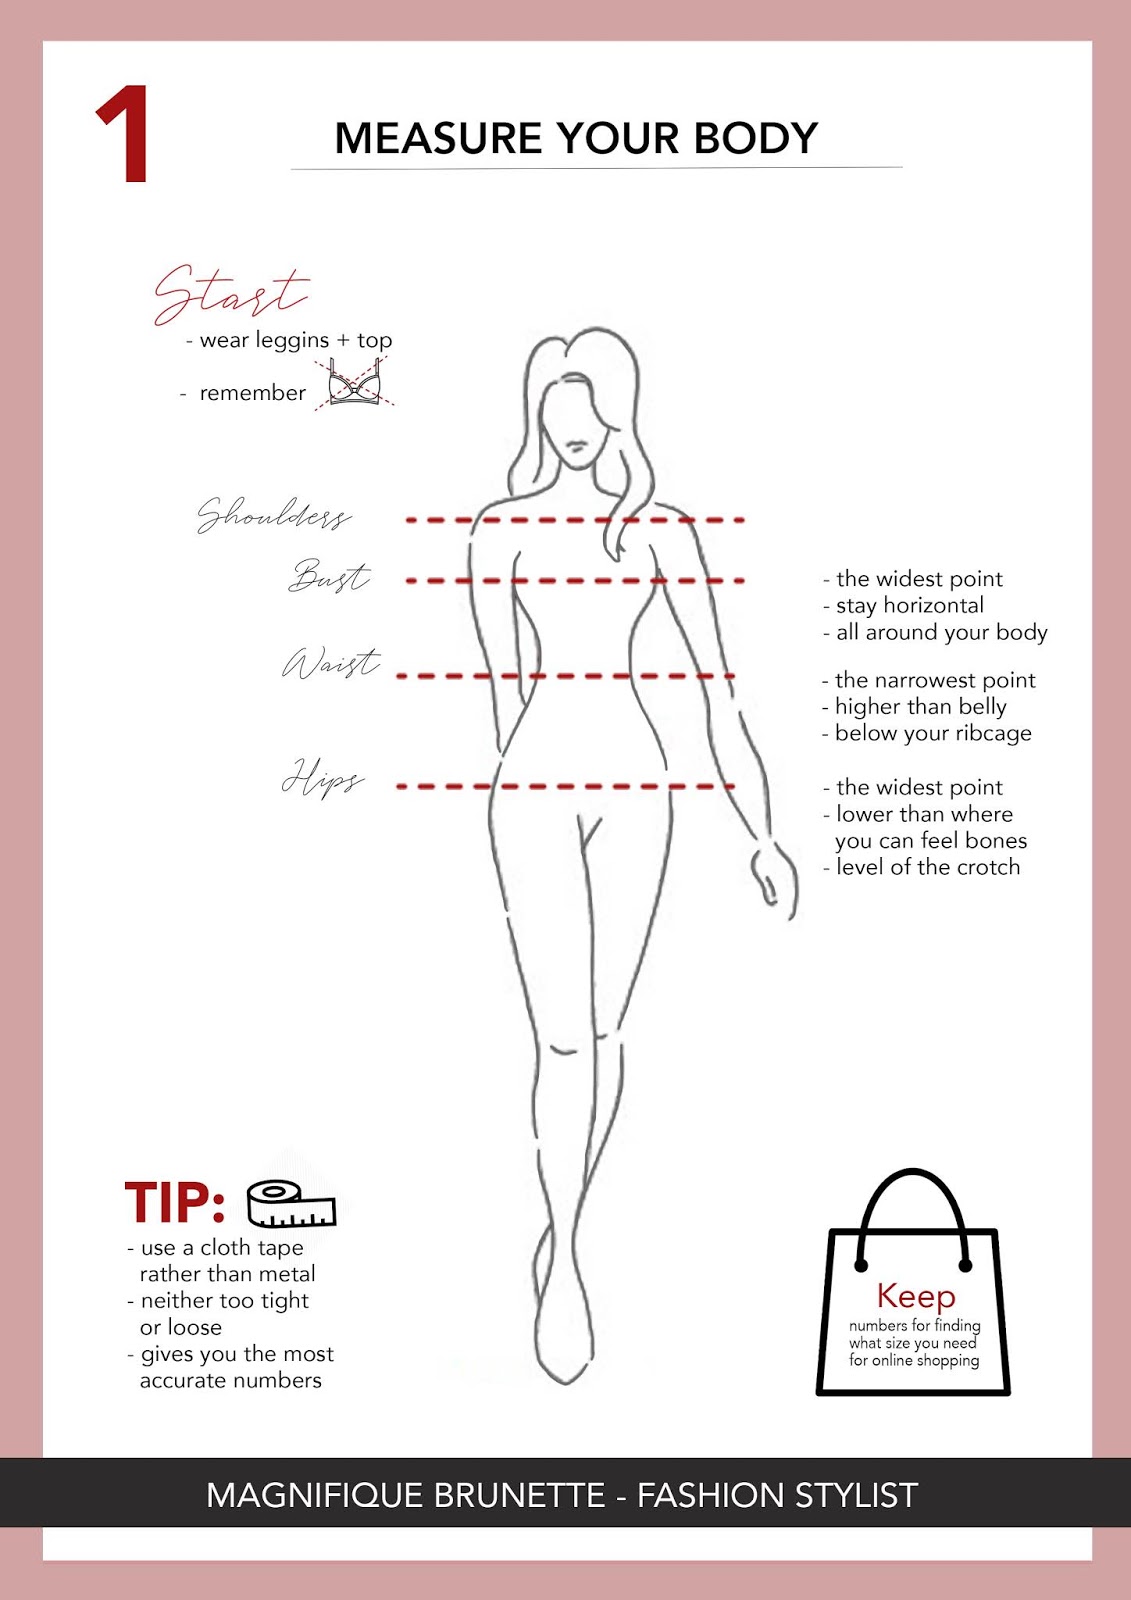 How To Dress For Your Body Type & Shape: The Ultimate Guide